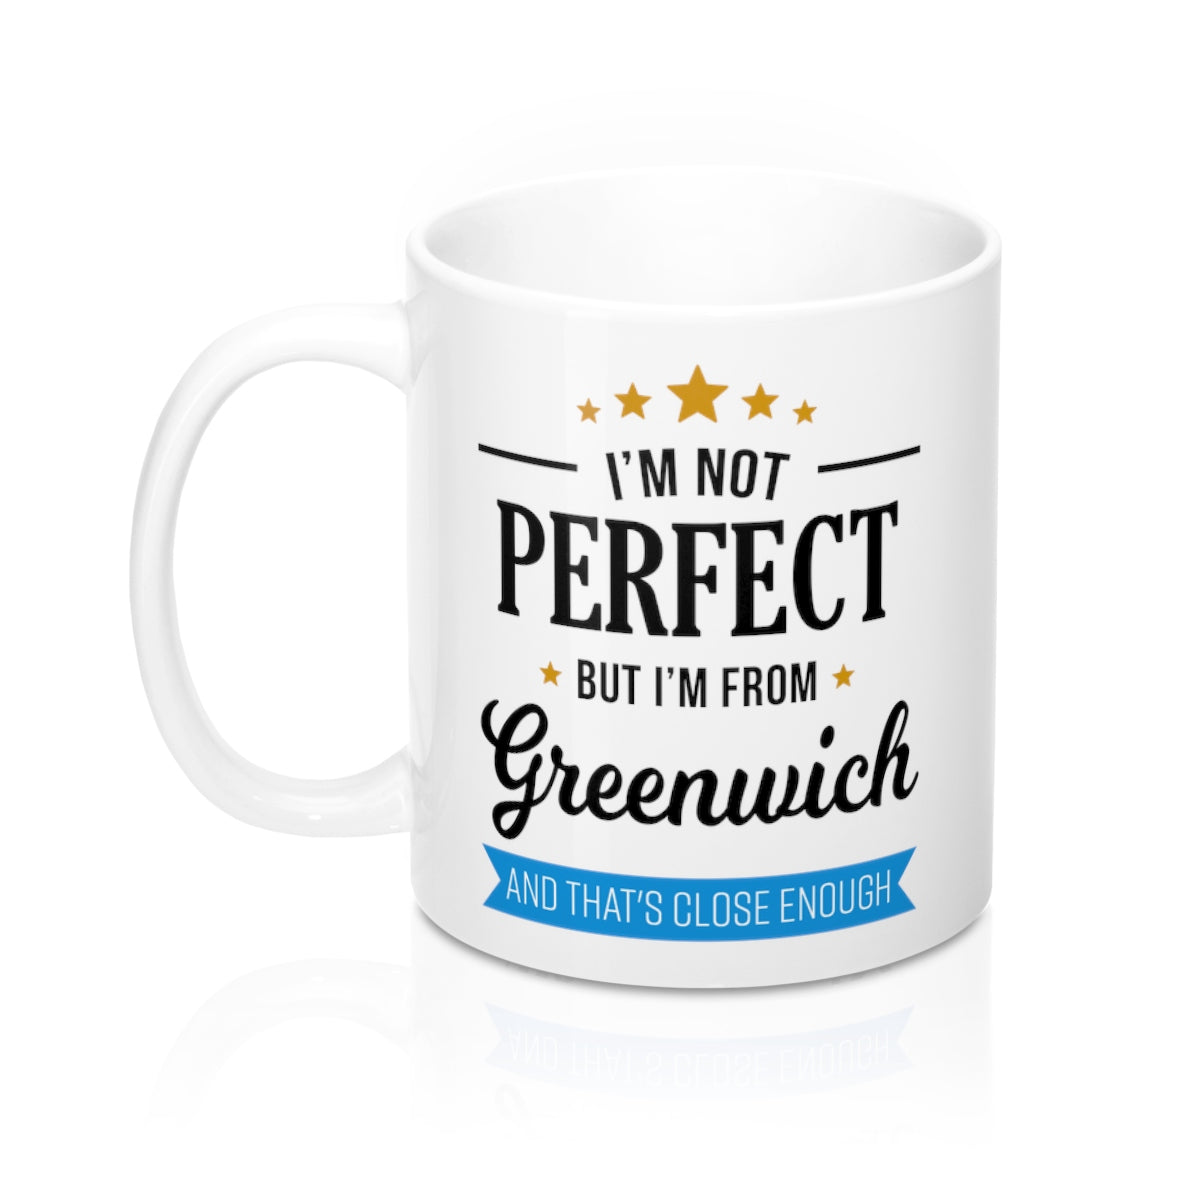 I'm Not Perfect But I'm From Greenwich Mug